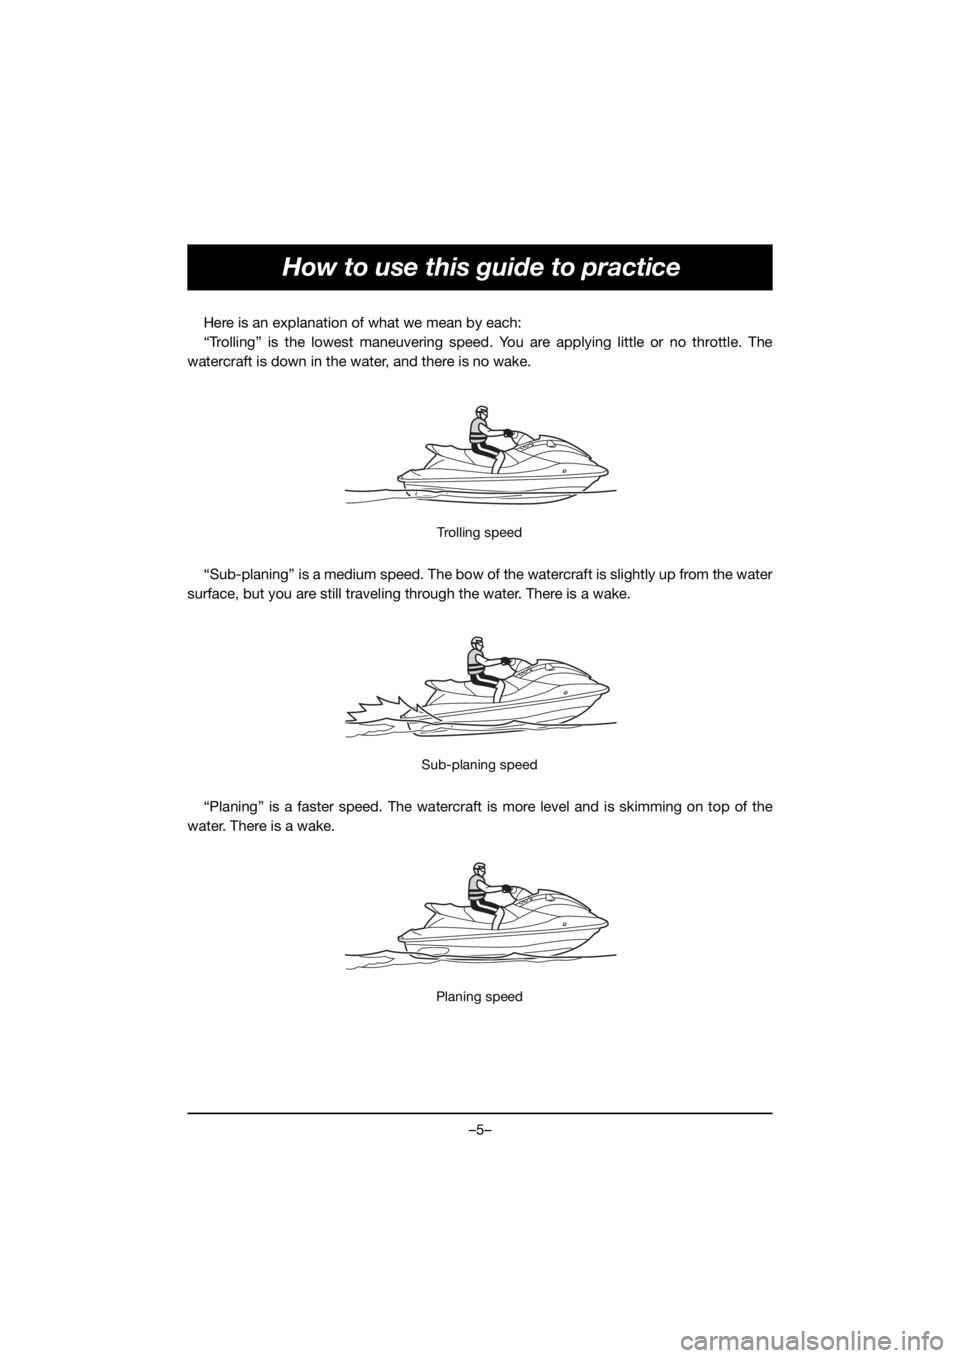 YAMAHA VX-C 2021  Manuale de Empleo (in Spanish) –5–
How to use this guide to practice
Here is an explanation of what we mean by each:
“Trolling” is the lowest maneuvering speed. You are applying little or no throttle. The
watercraft is down